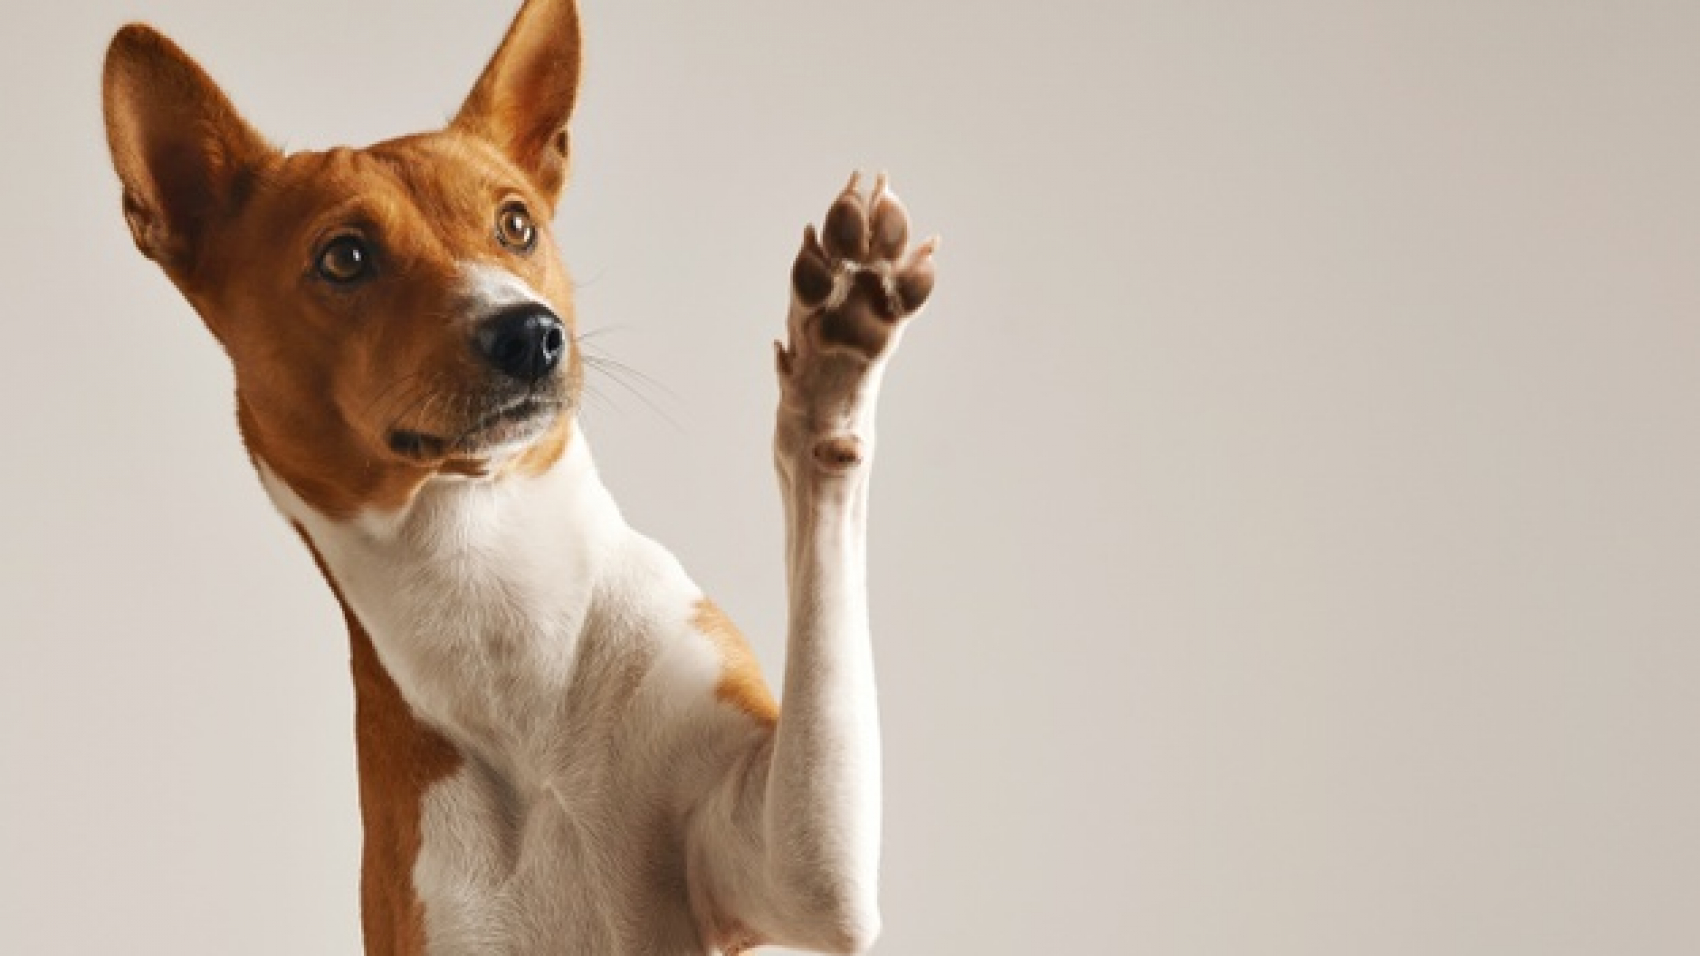 adorable-brown-and-white-basenji-dog-smiling-and-giving-a-high-five-isolated-on-white_346278-1657